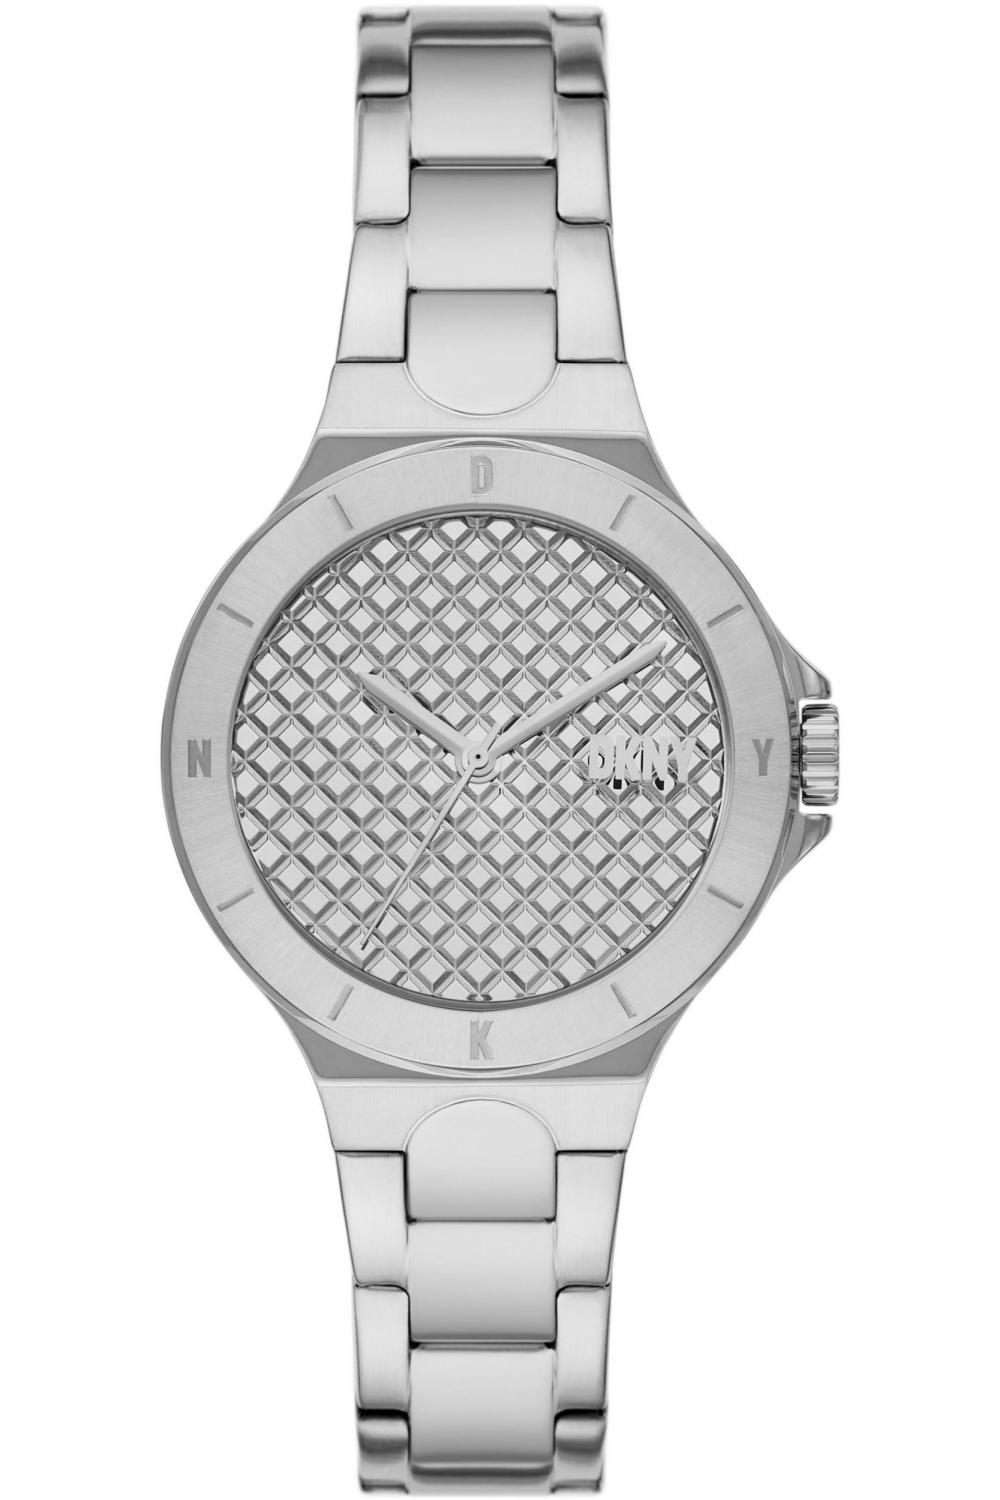 dkny chambers ny6667 silver case with stainless steel bracelet image1